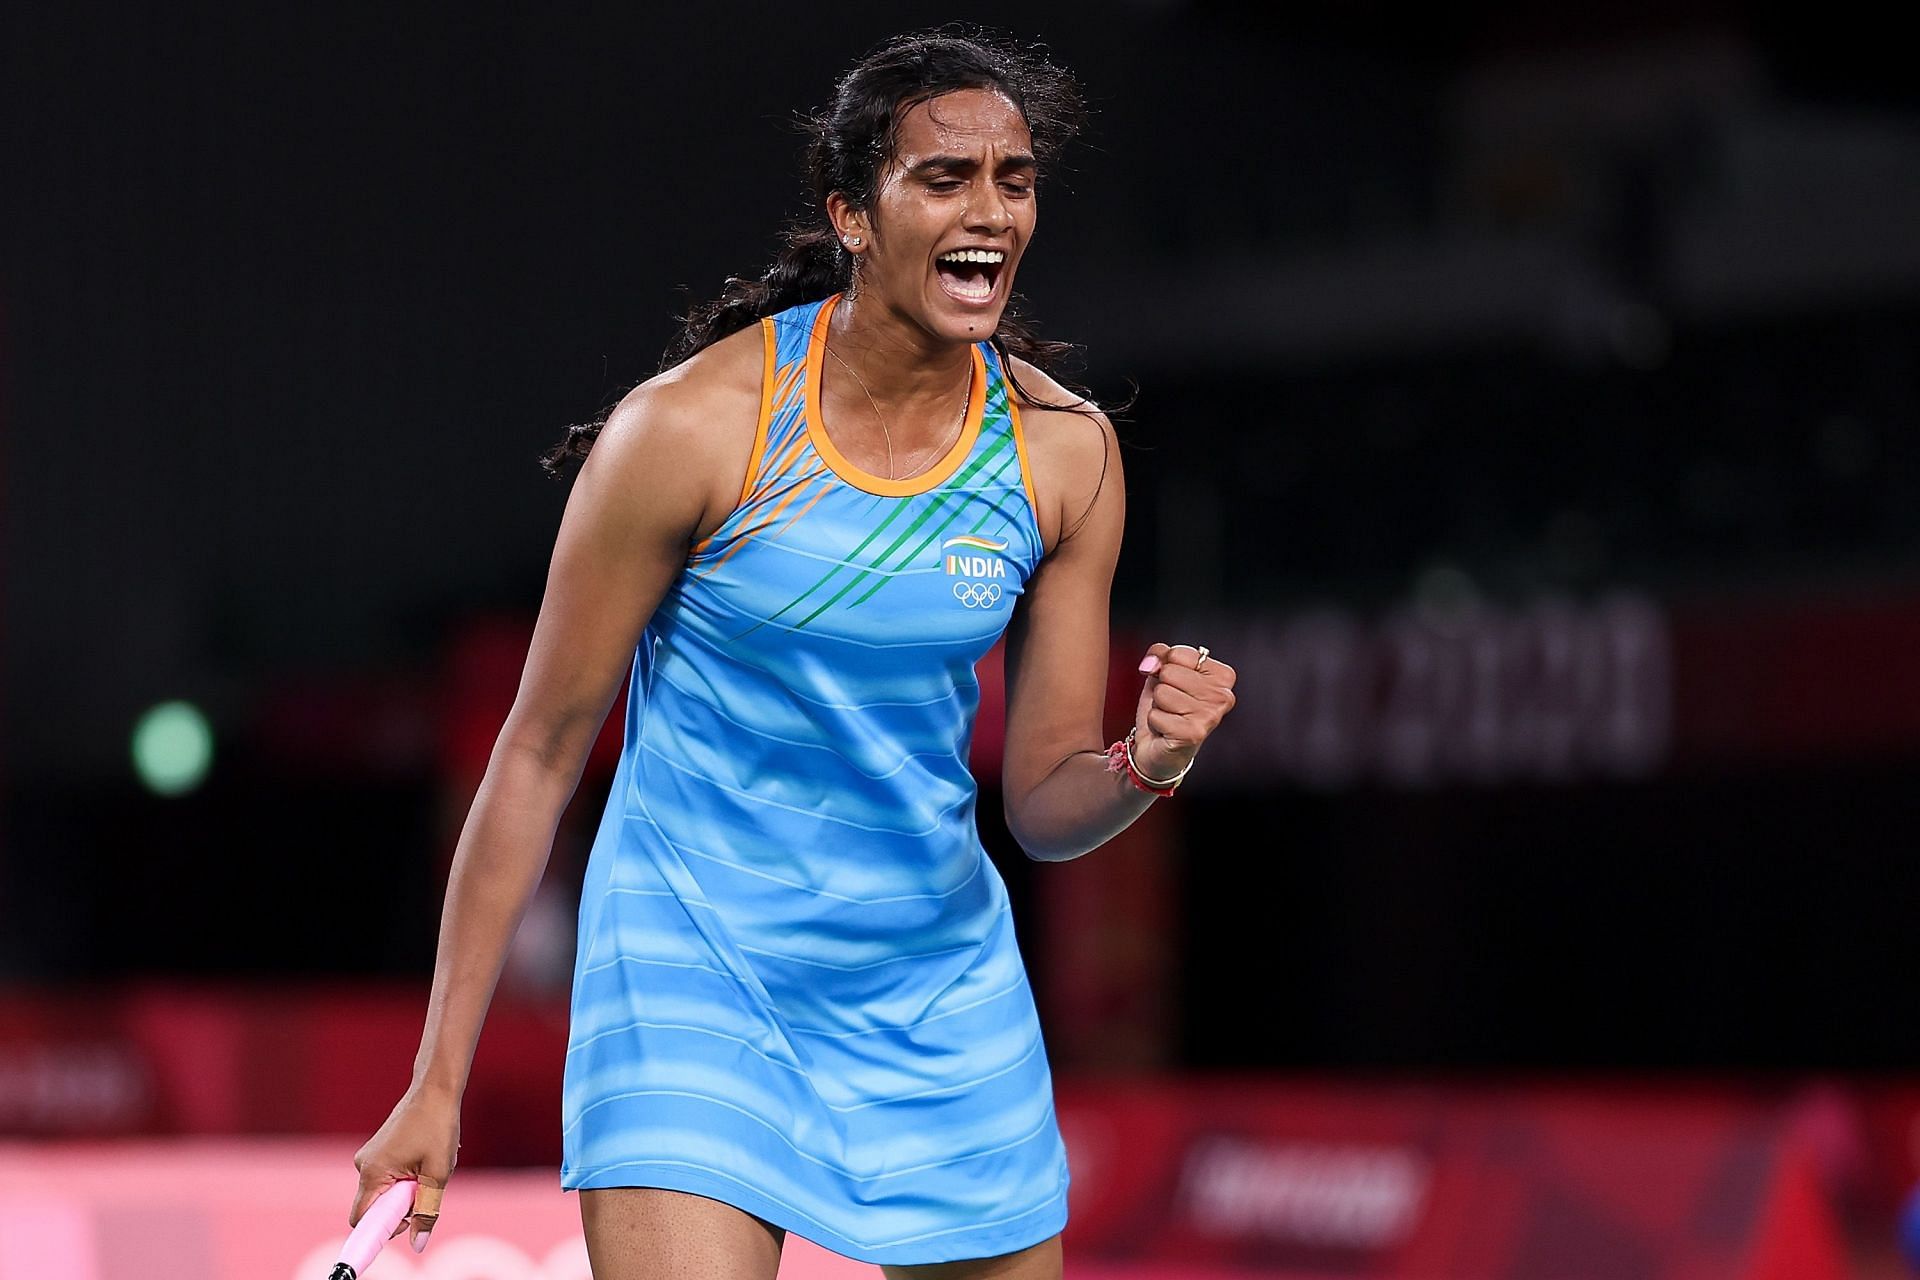 PV Sindhu in action at Tokyo Olympics